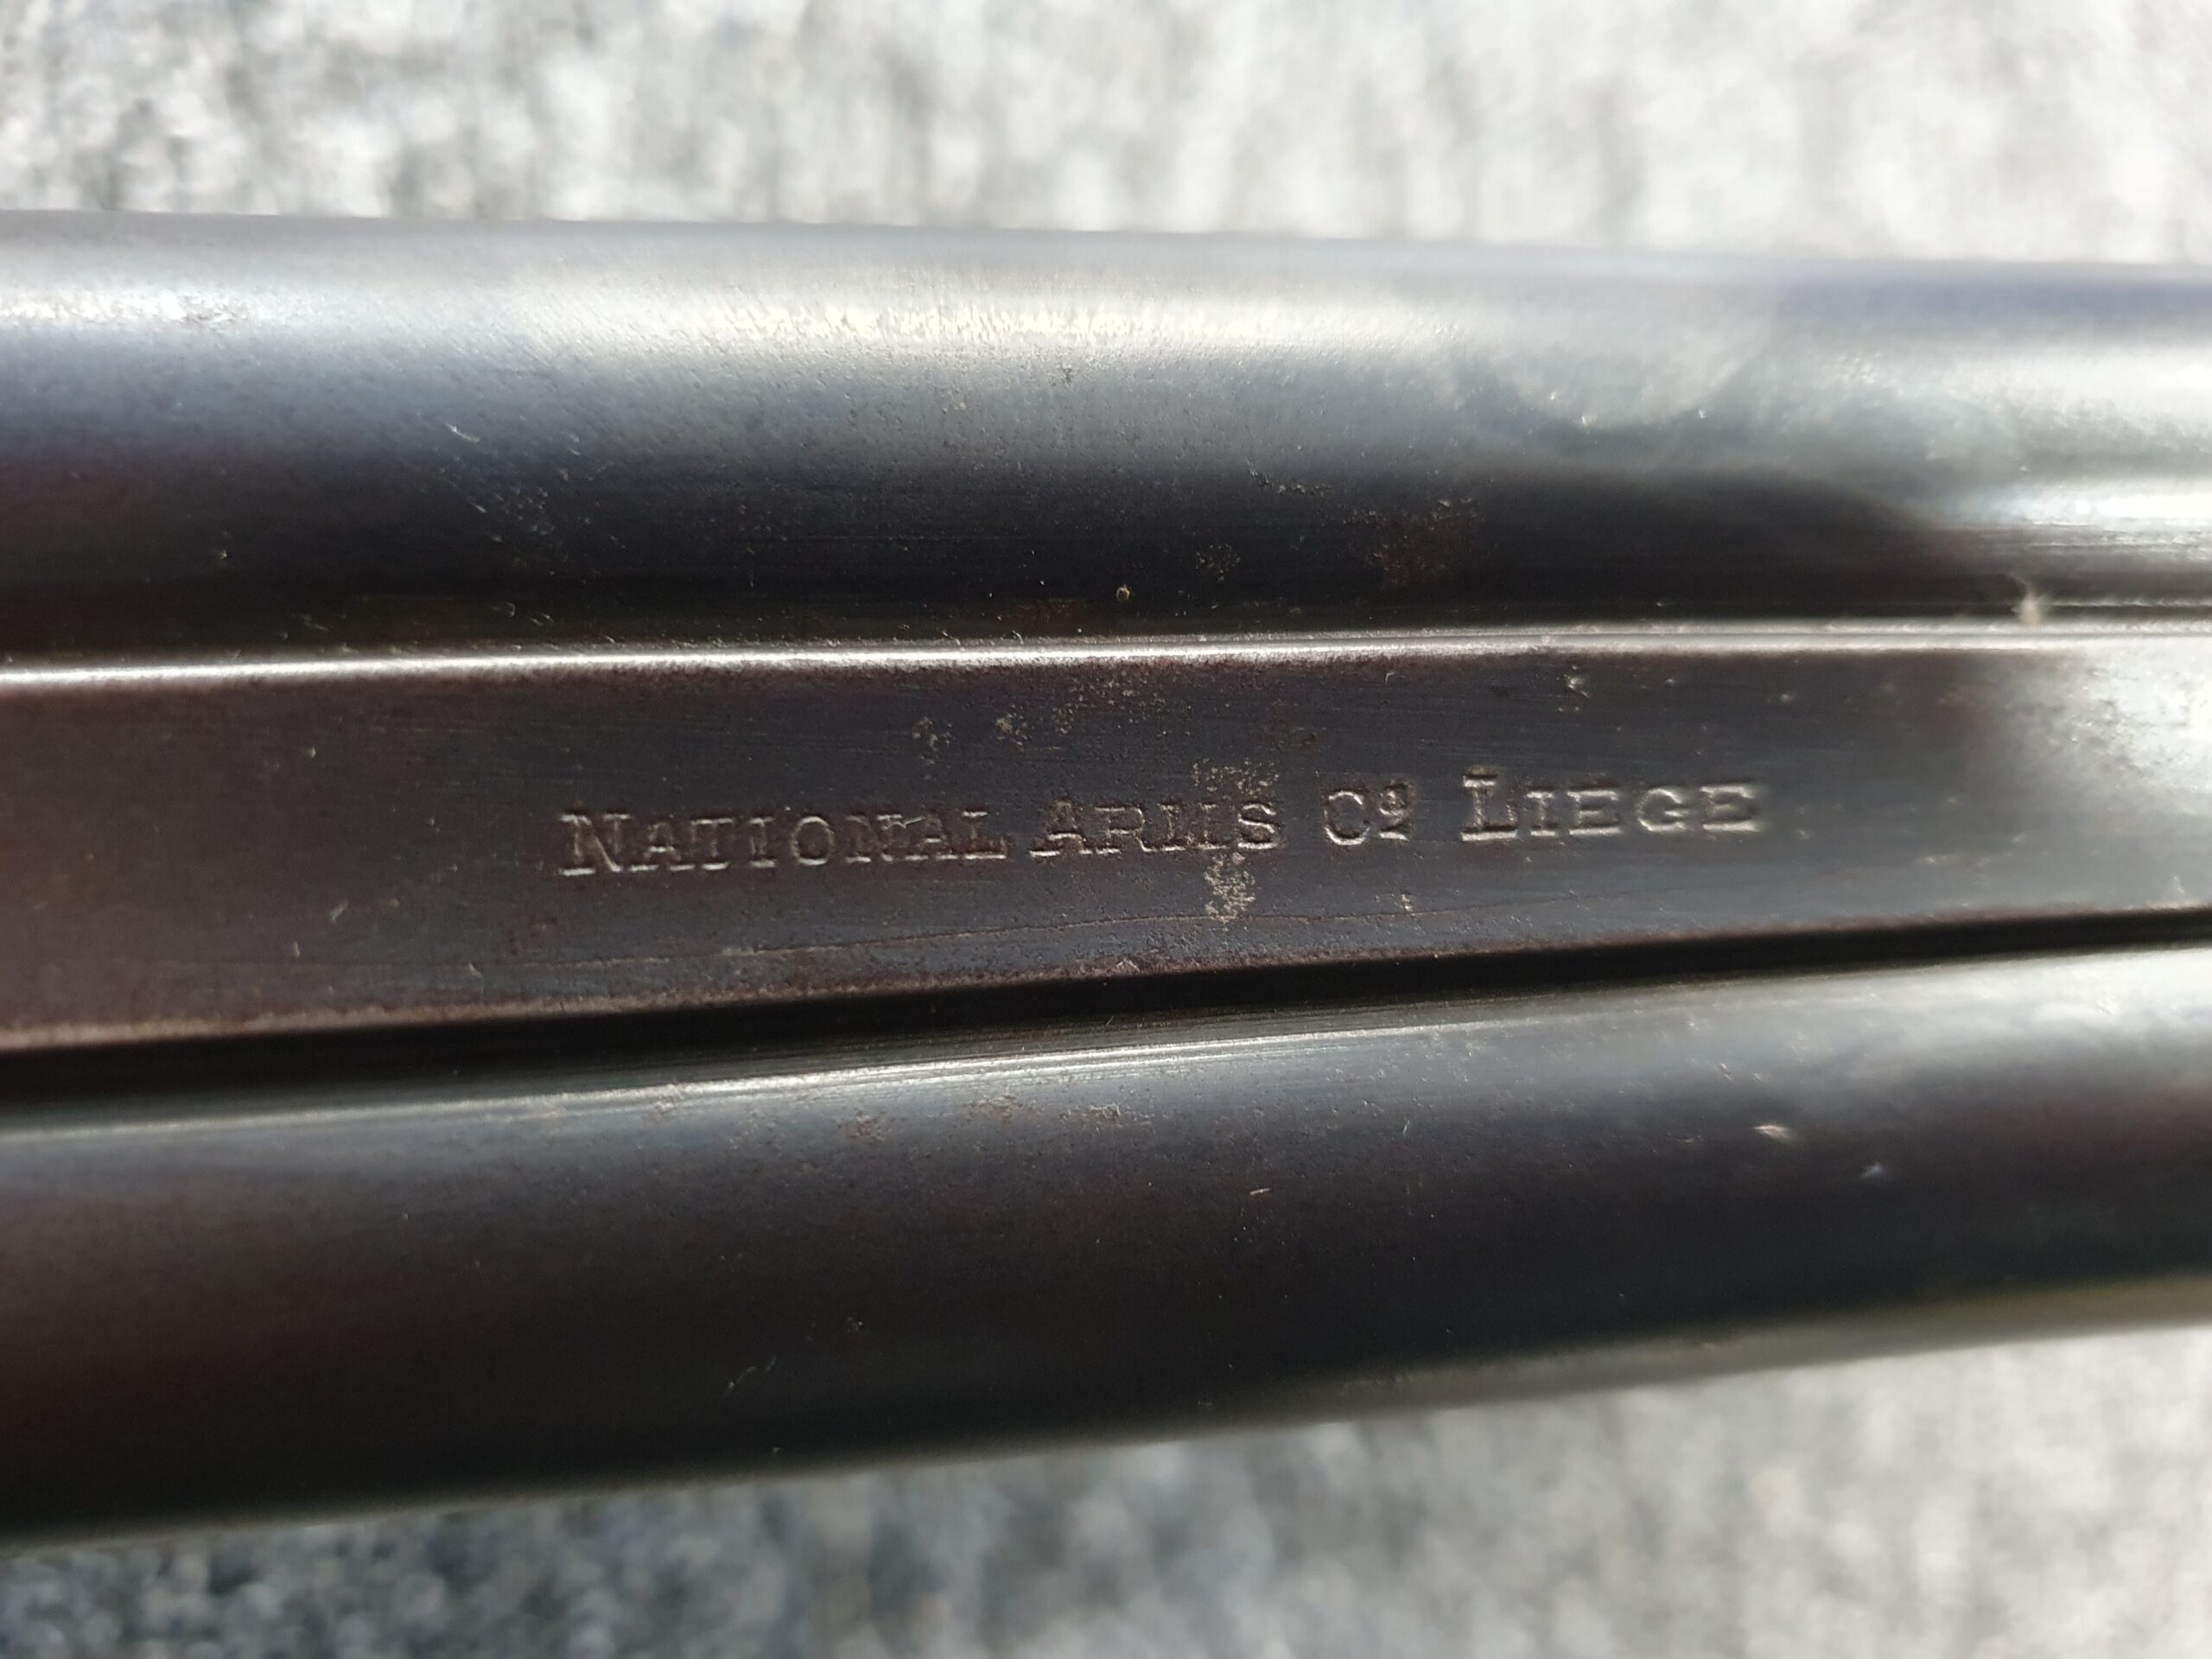 Rendered National Arms 12g Side By Side - Beaton Firearms